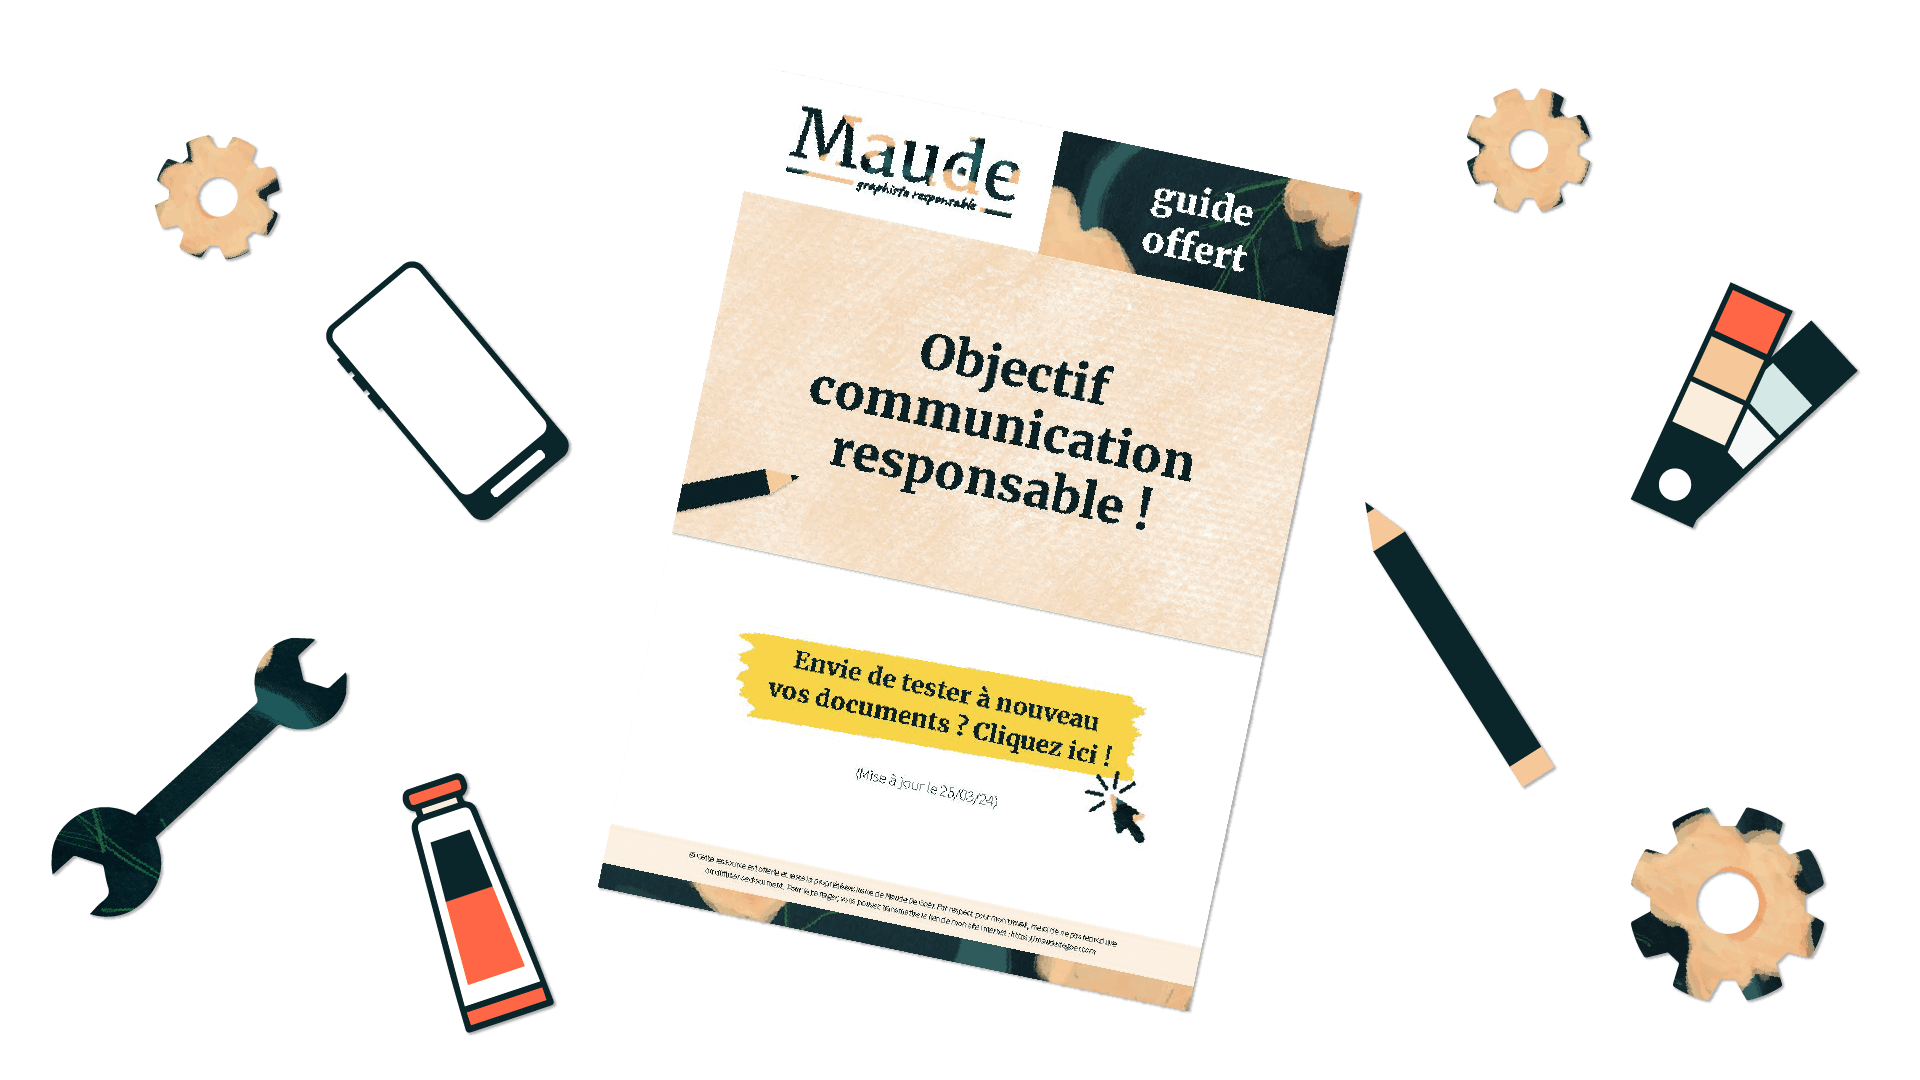 Guide Objectif communication responsable !